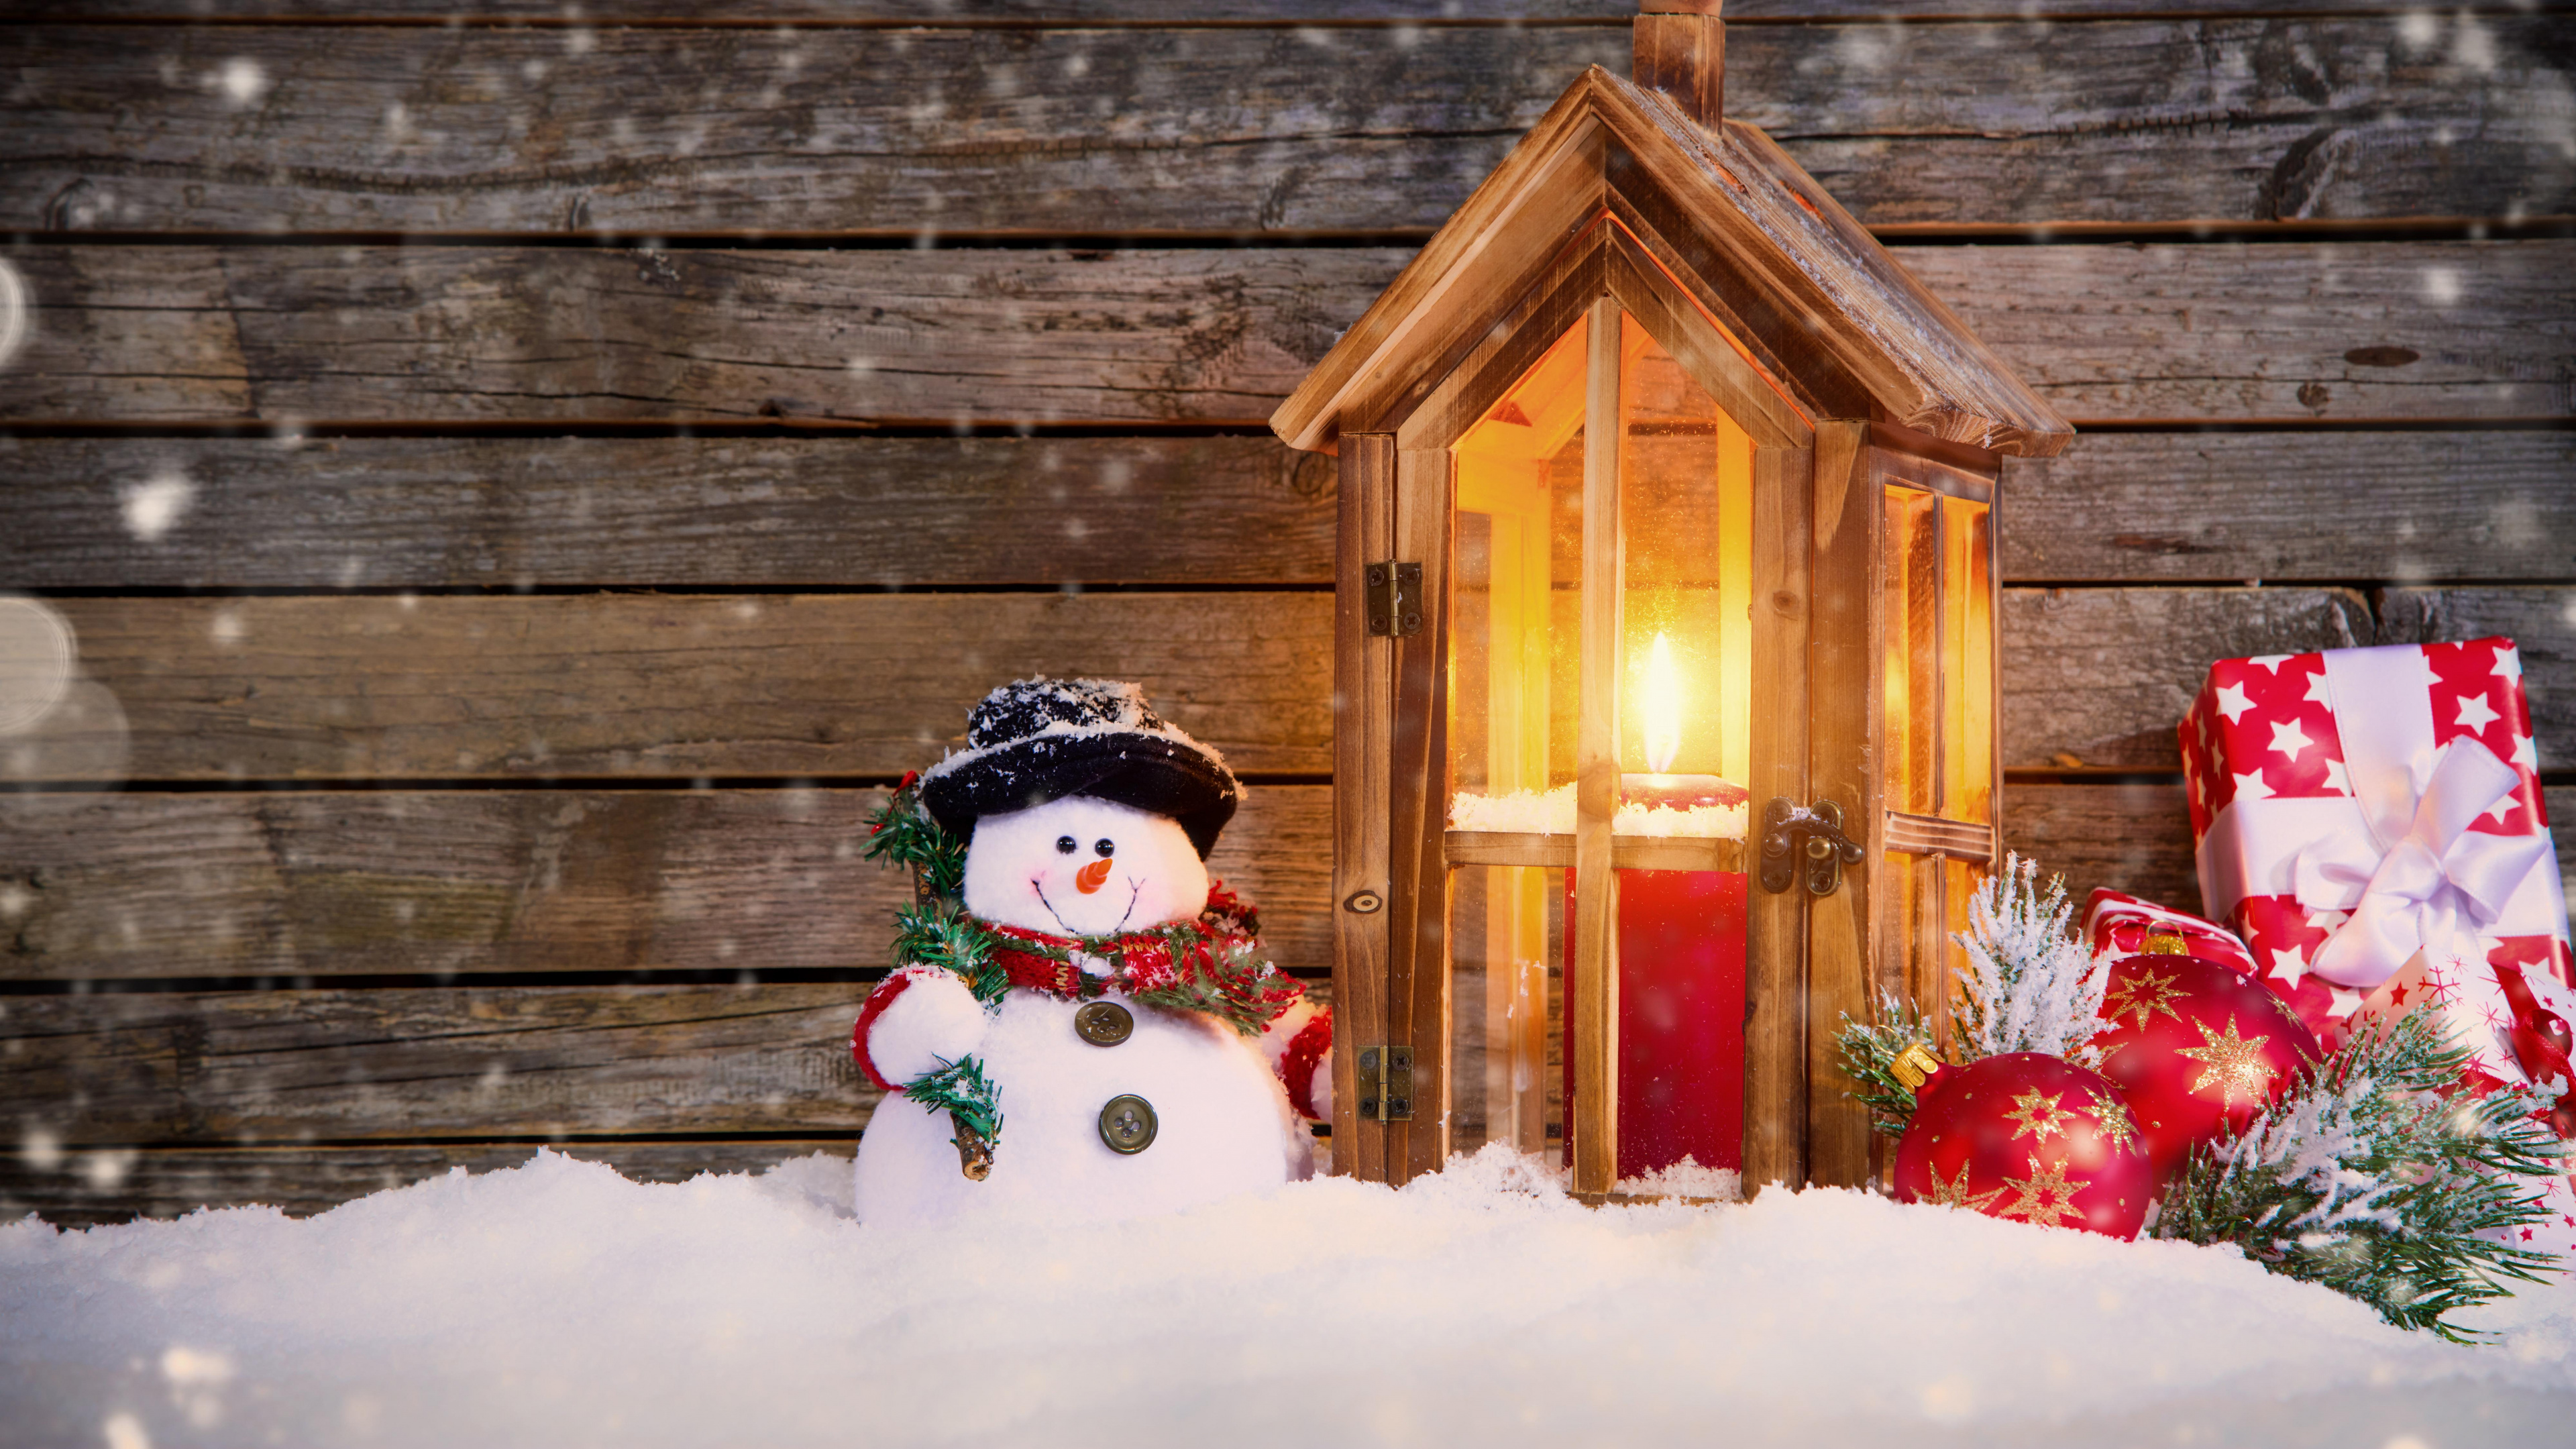 Christmas Day, Snowman, Christmas Decoration, Christmas Ornament, Snow. Wallpaper in 3840x2160 Resolution